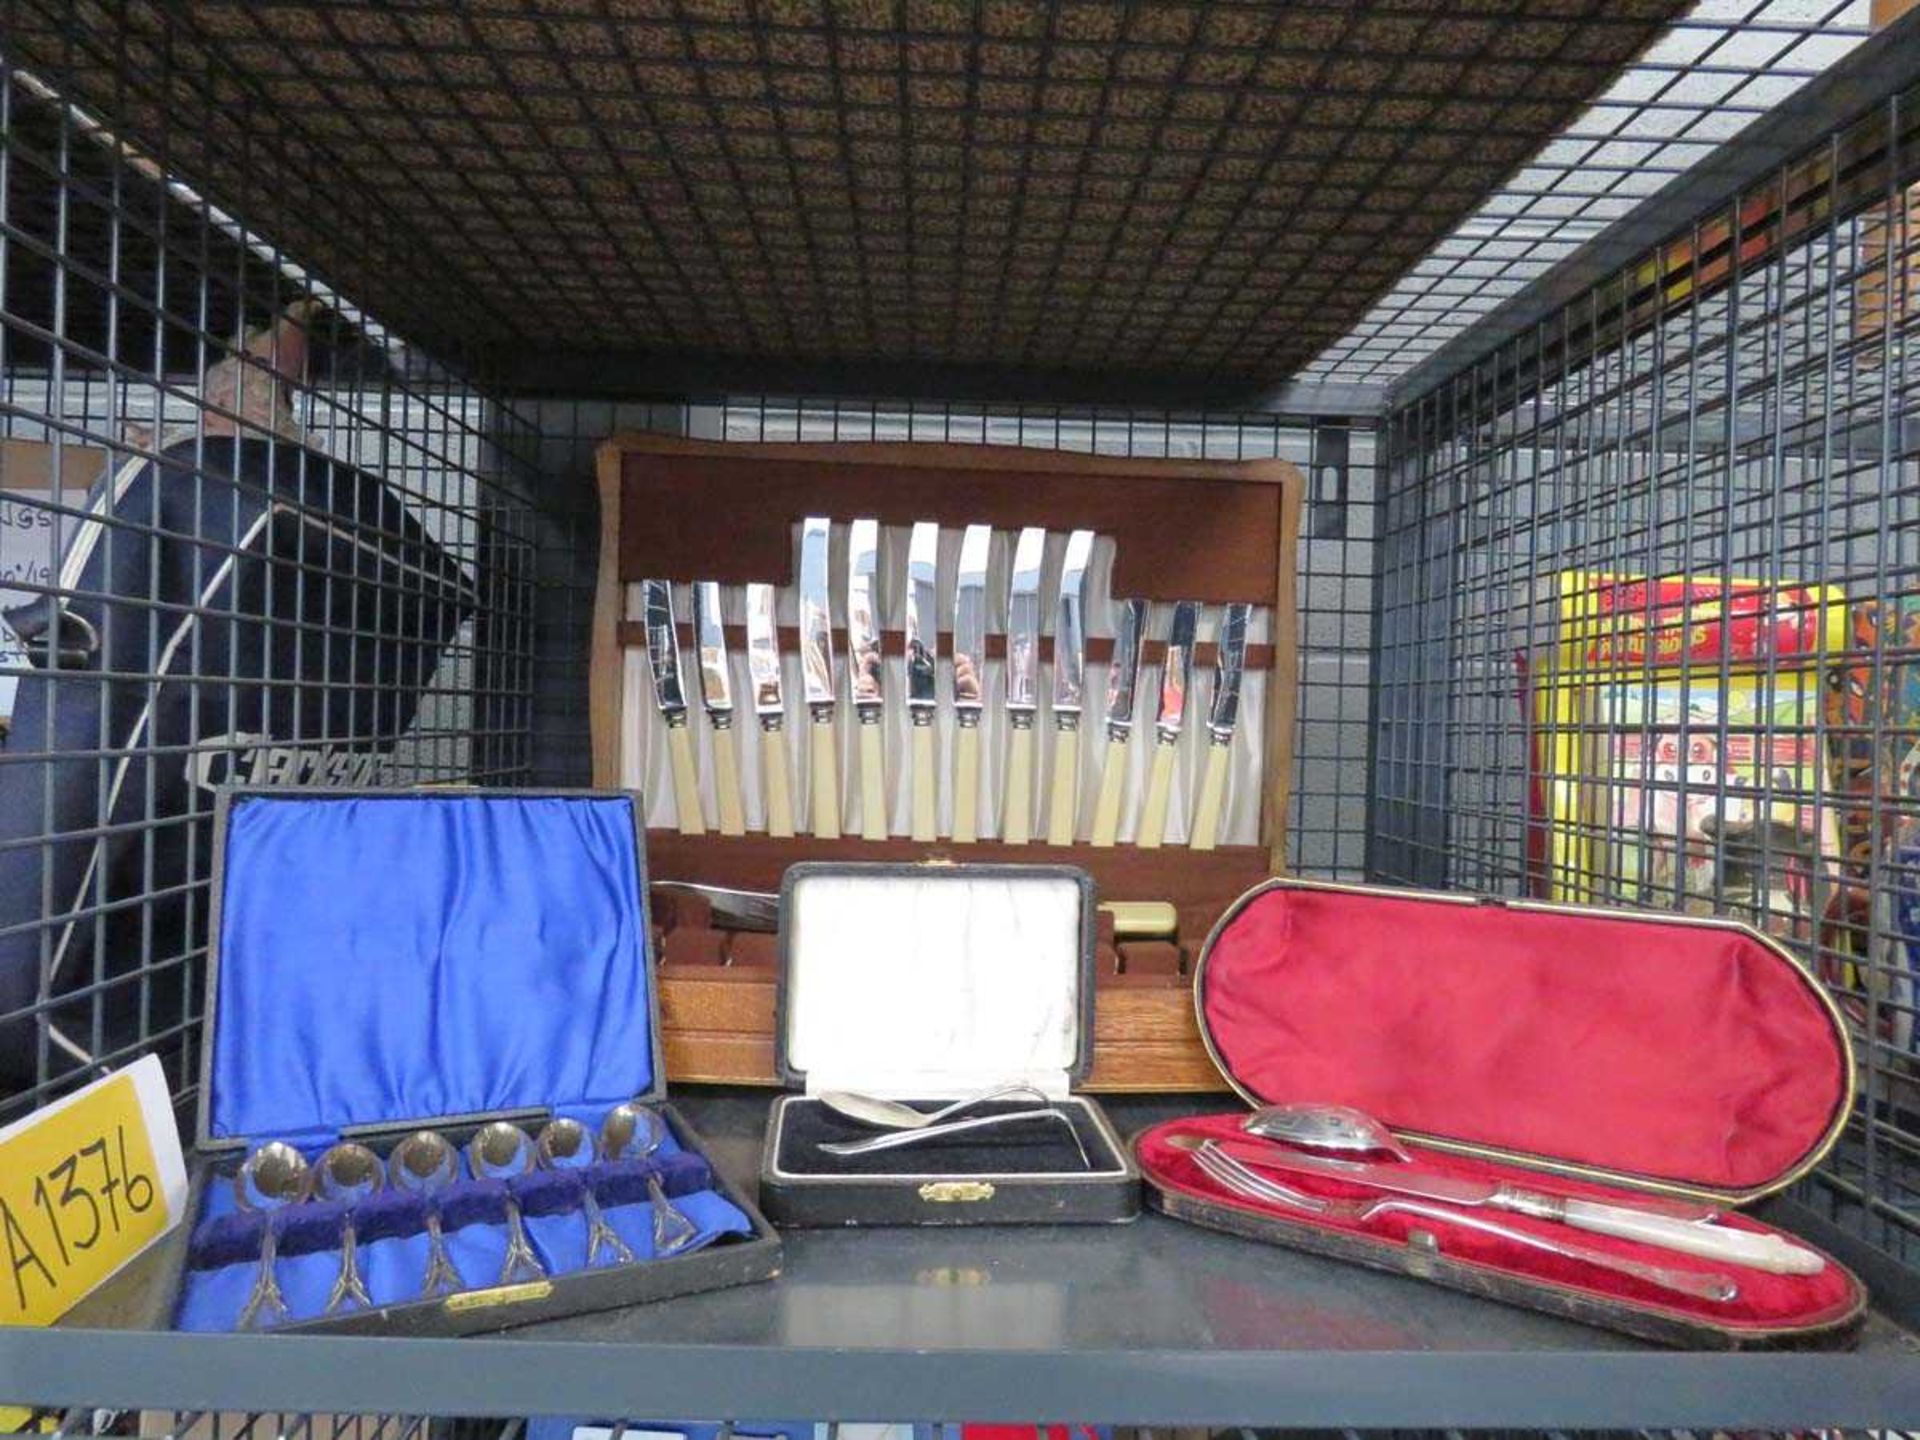 Cage containing cutlery sets